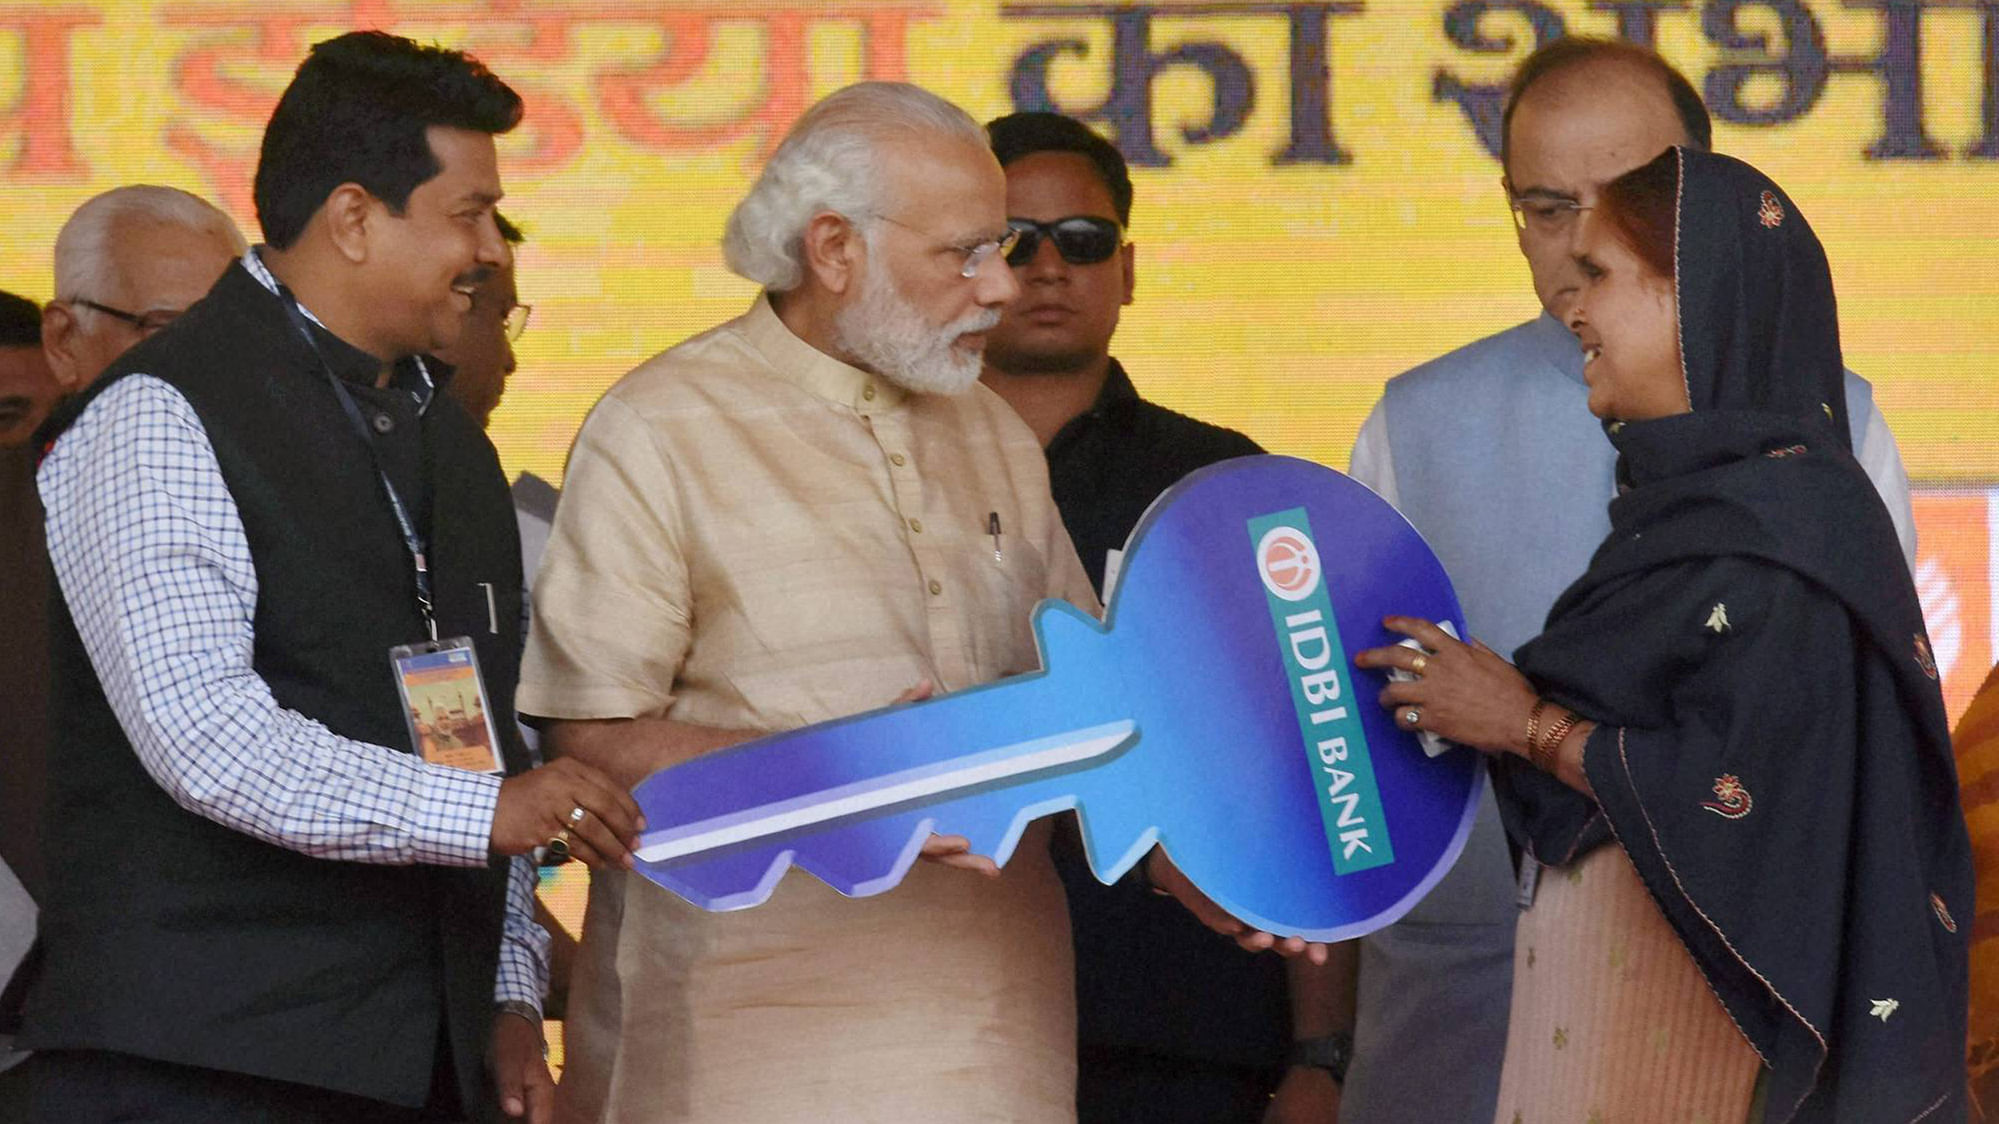 Prime Minister Narendra Modi hands over the keys of an e-rickshaw to a beneficiary under Pradhan Mantri Mudra Yojana launched under Stand up India Scheme in Noida on Tuesday. (Photo: PTI)